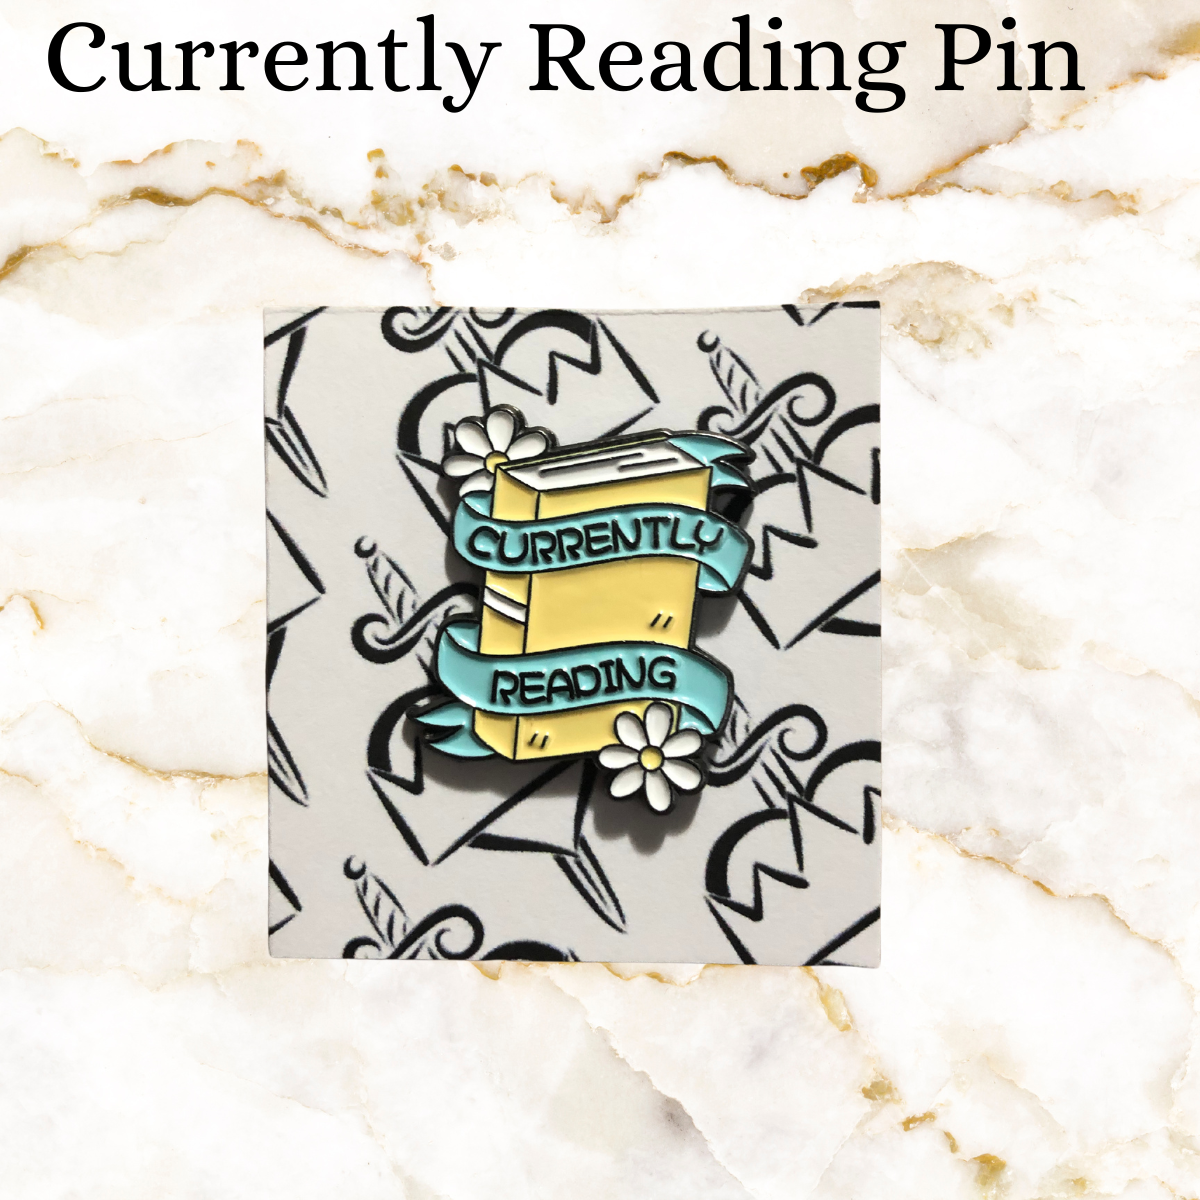 Book pin - Yellow book with white flowers on top and bottom - blue ribbon on front says Currently Reading